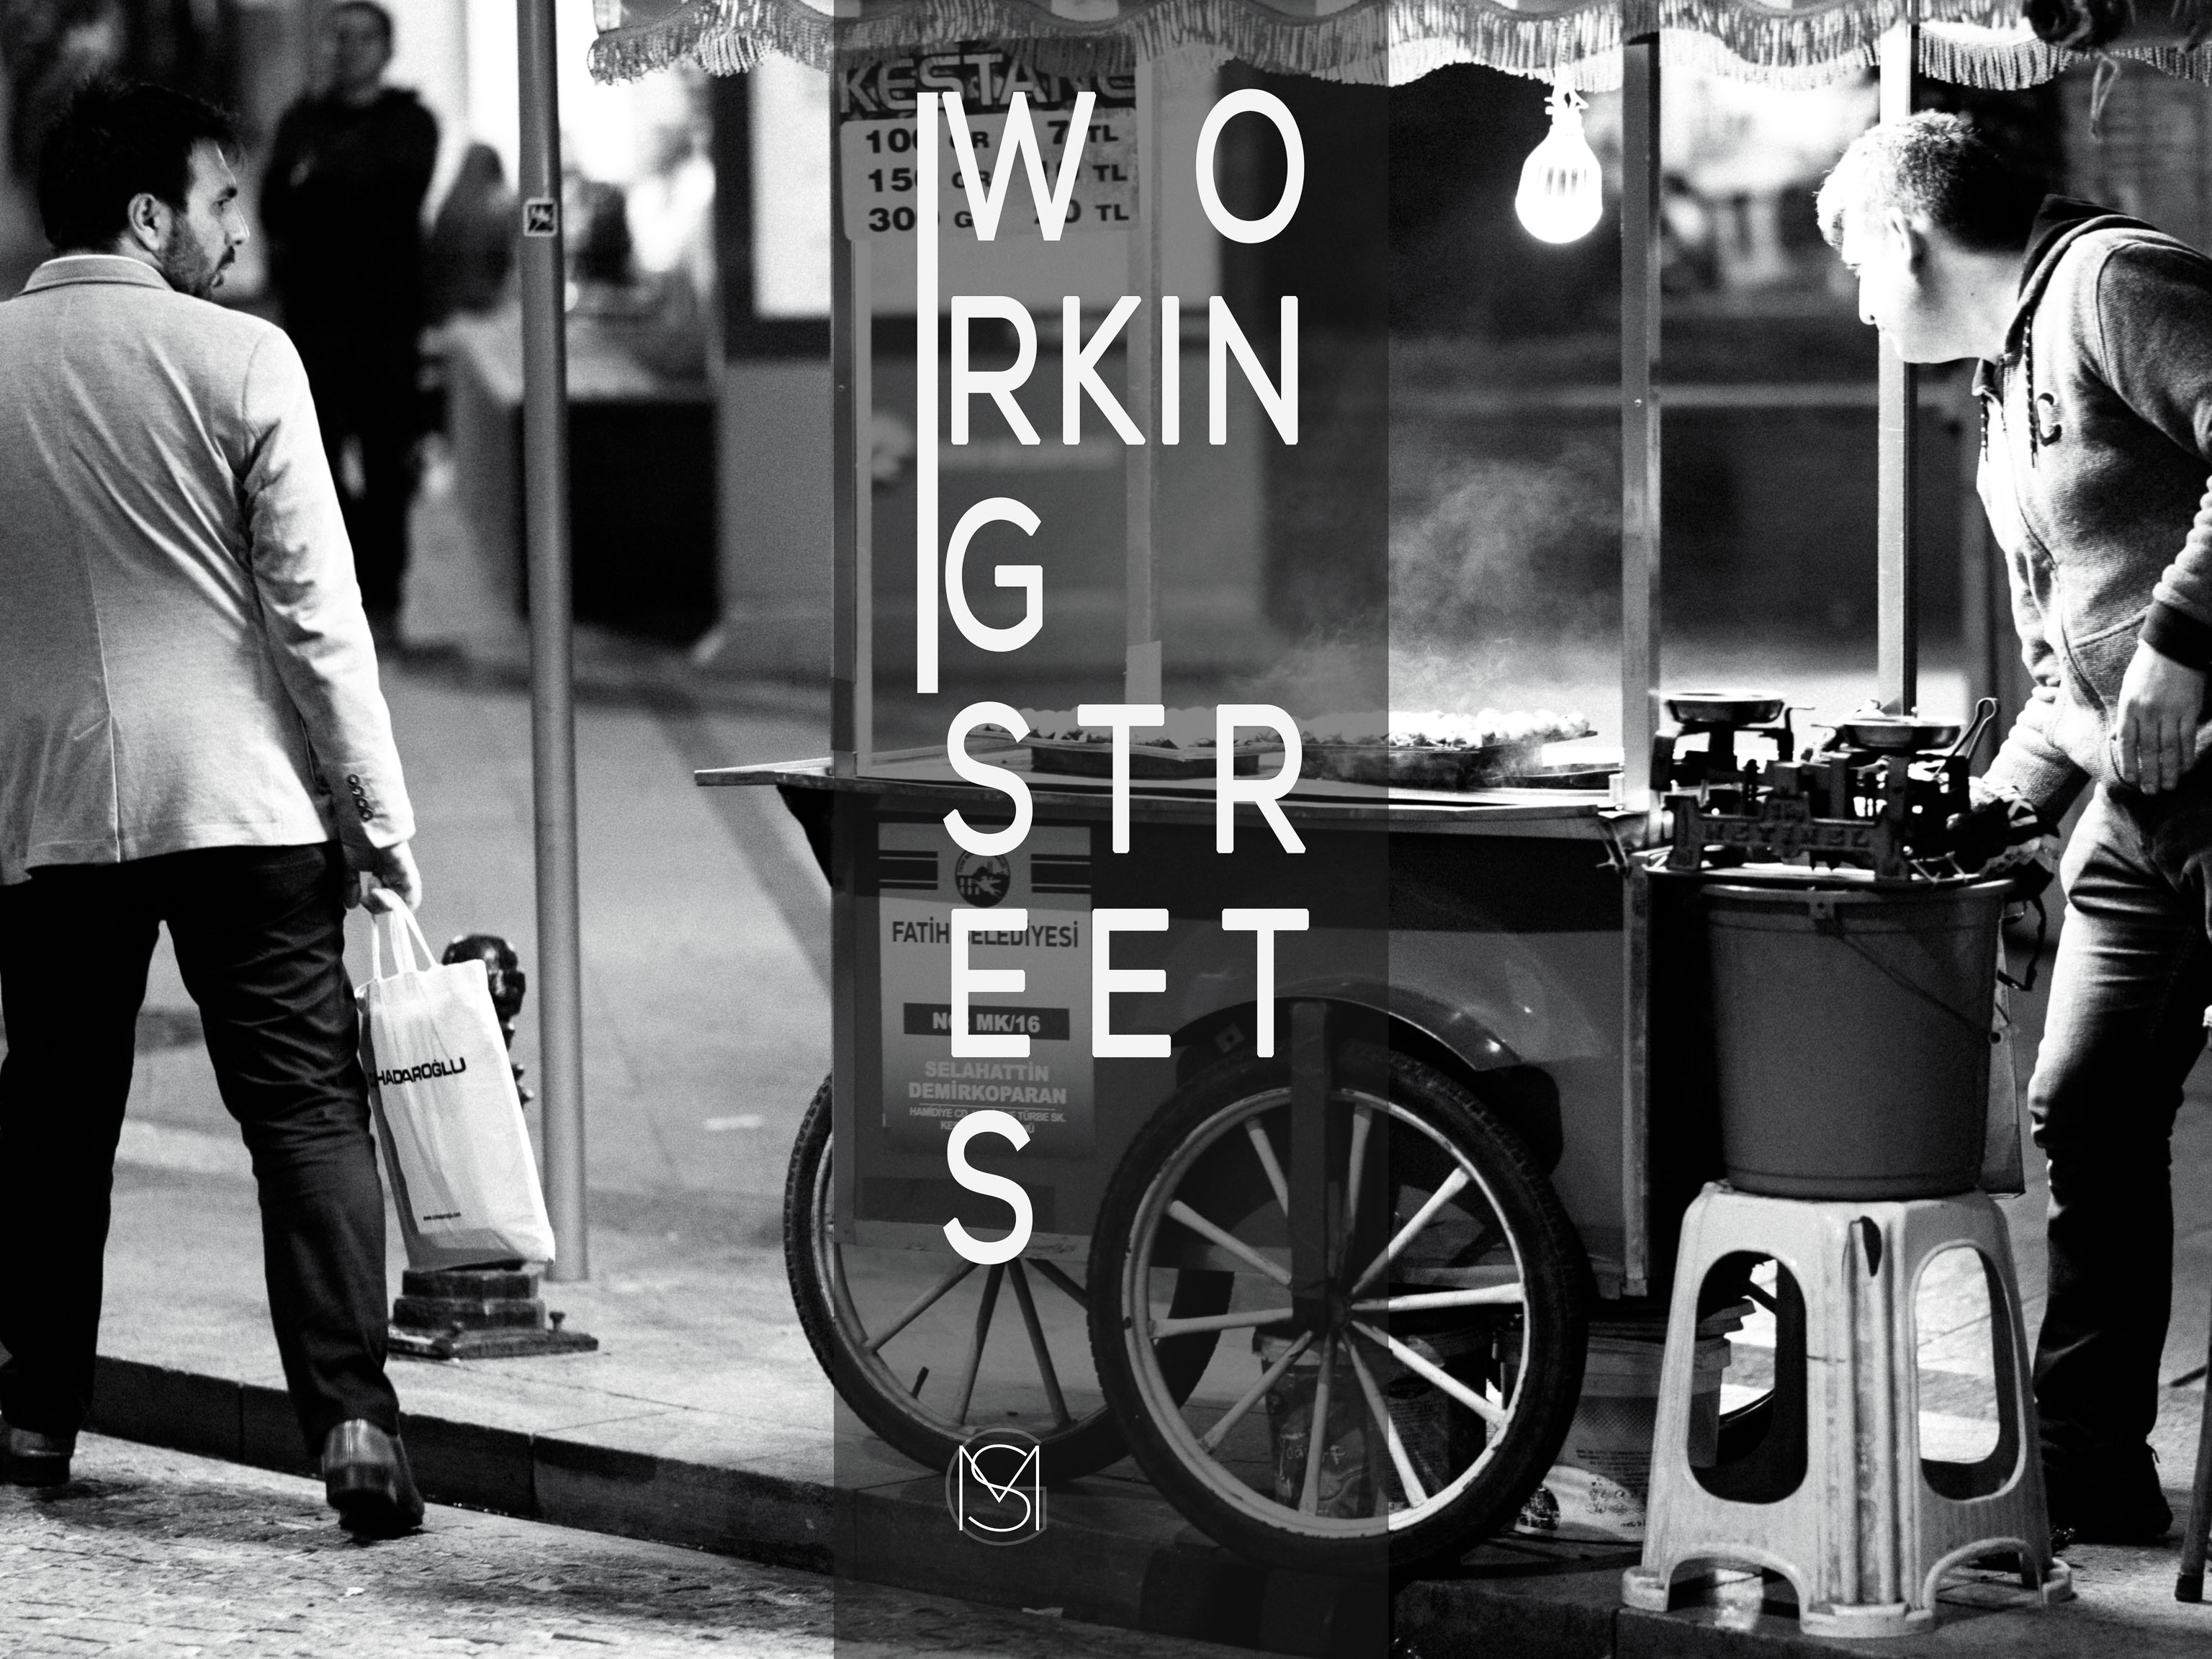 working streets